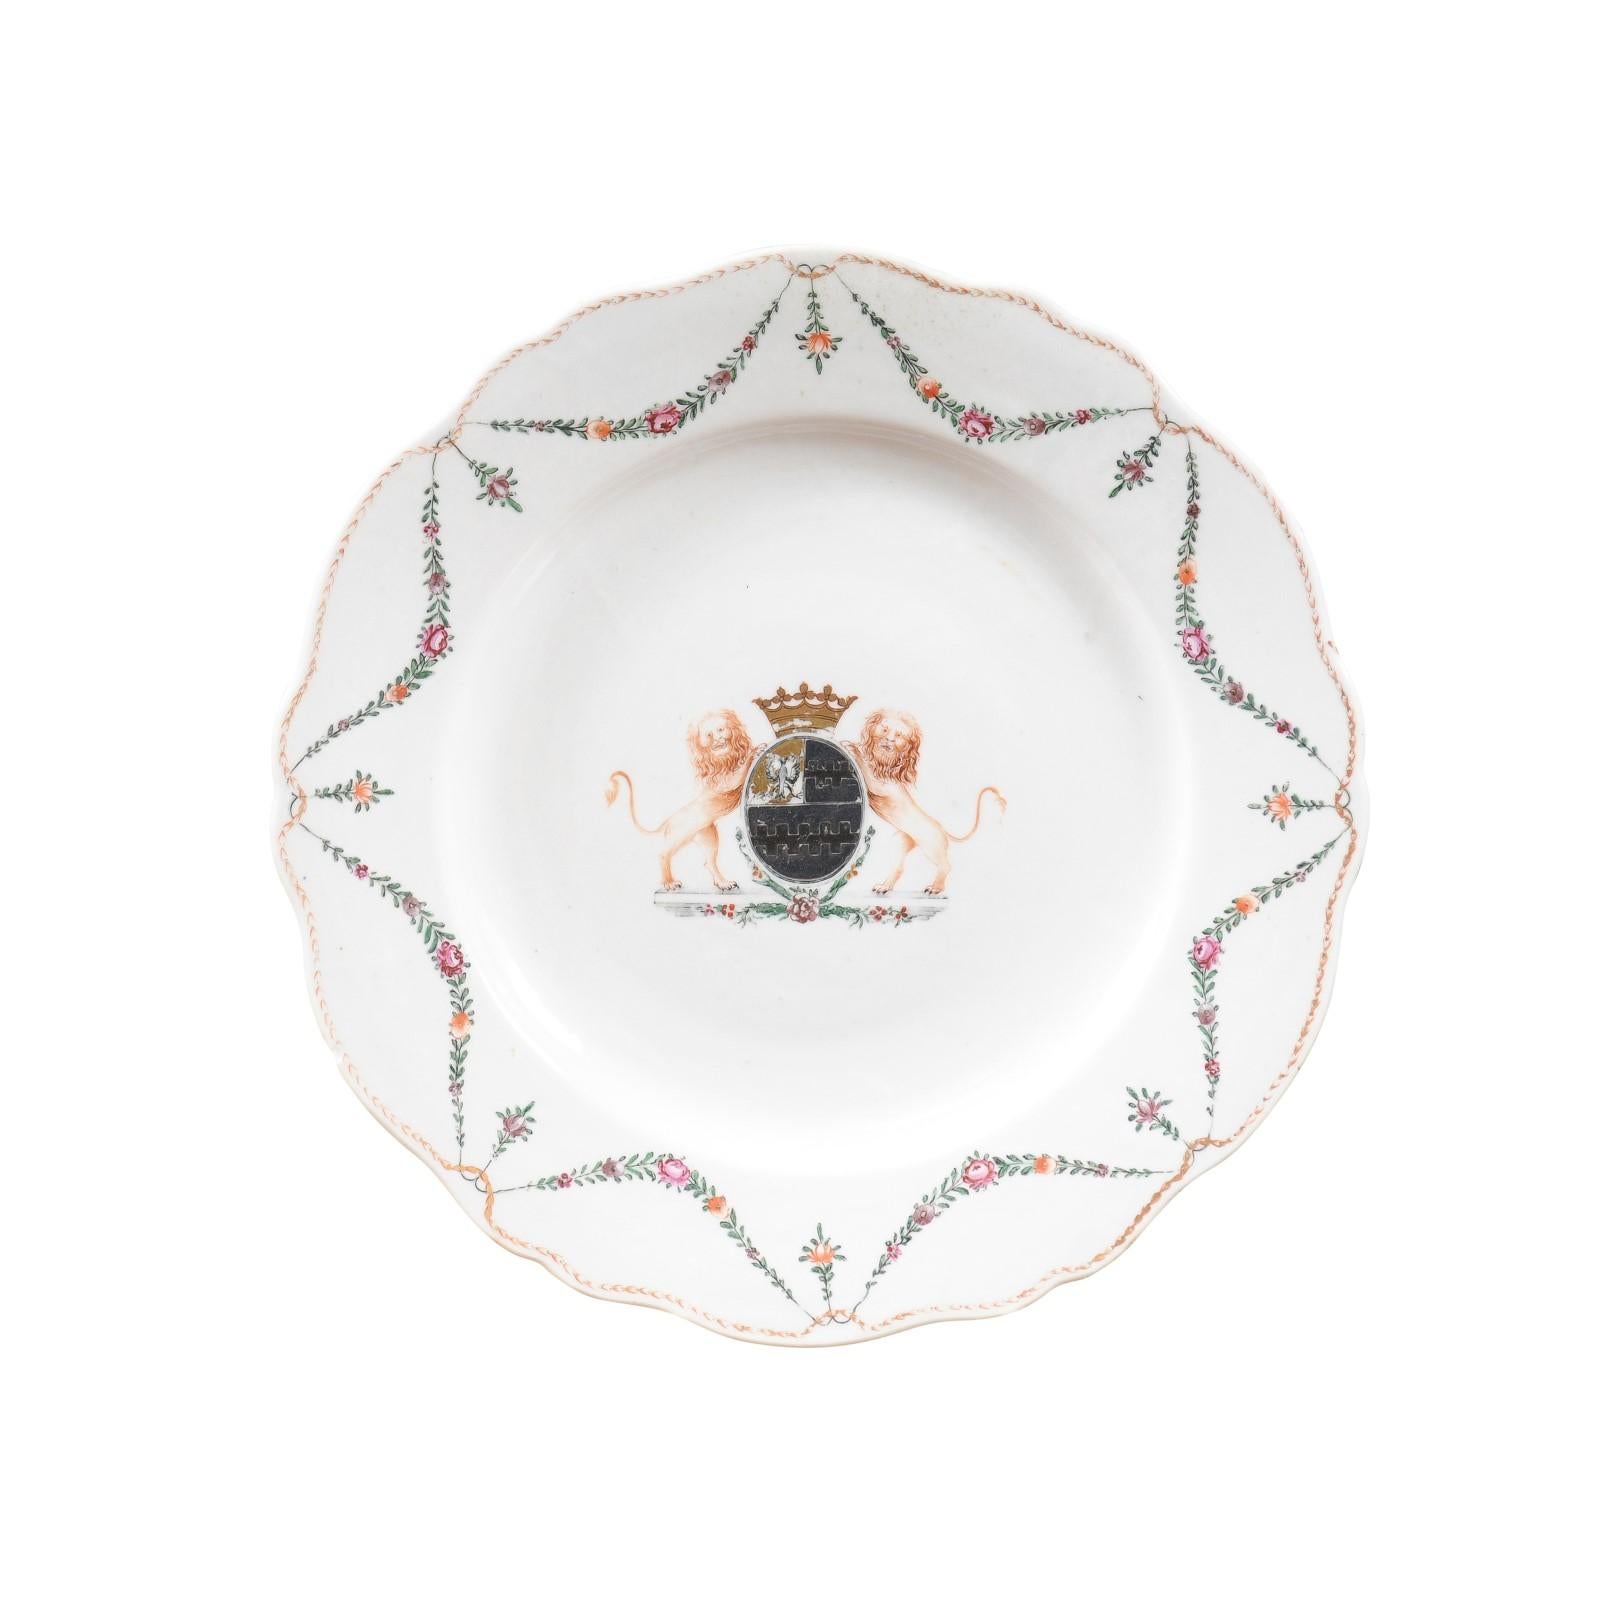 18th Century Chinese Export Porcelain Cake Plate / Charger with Armorial Crest For Sale 8